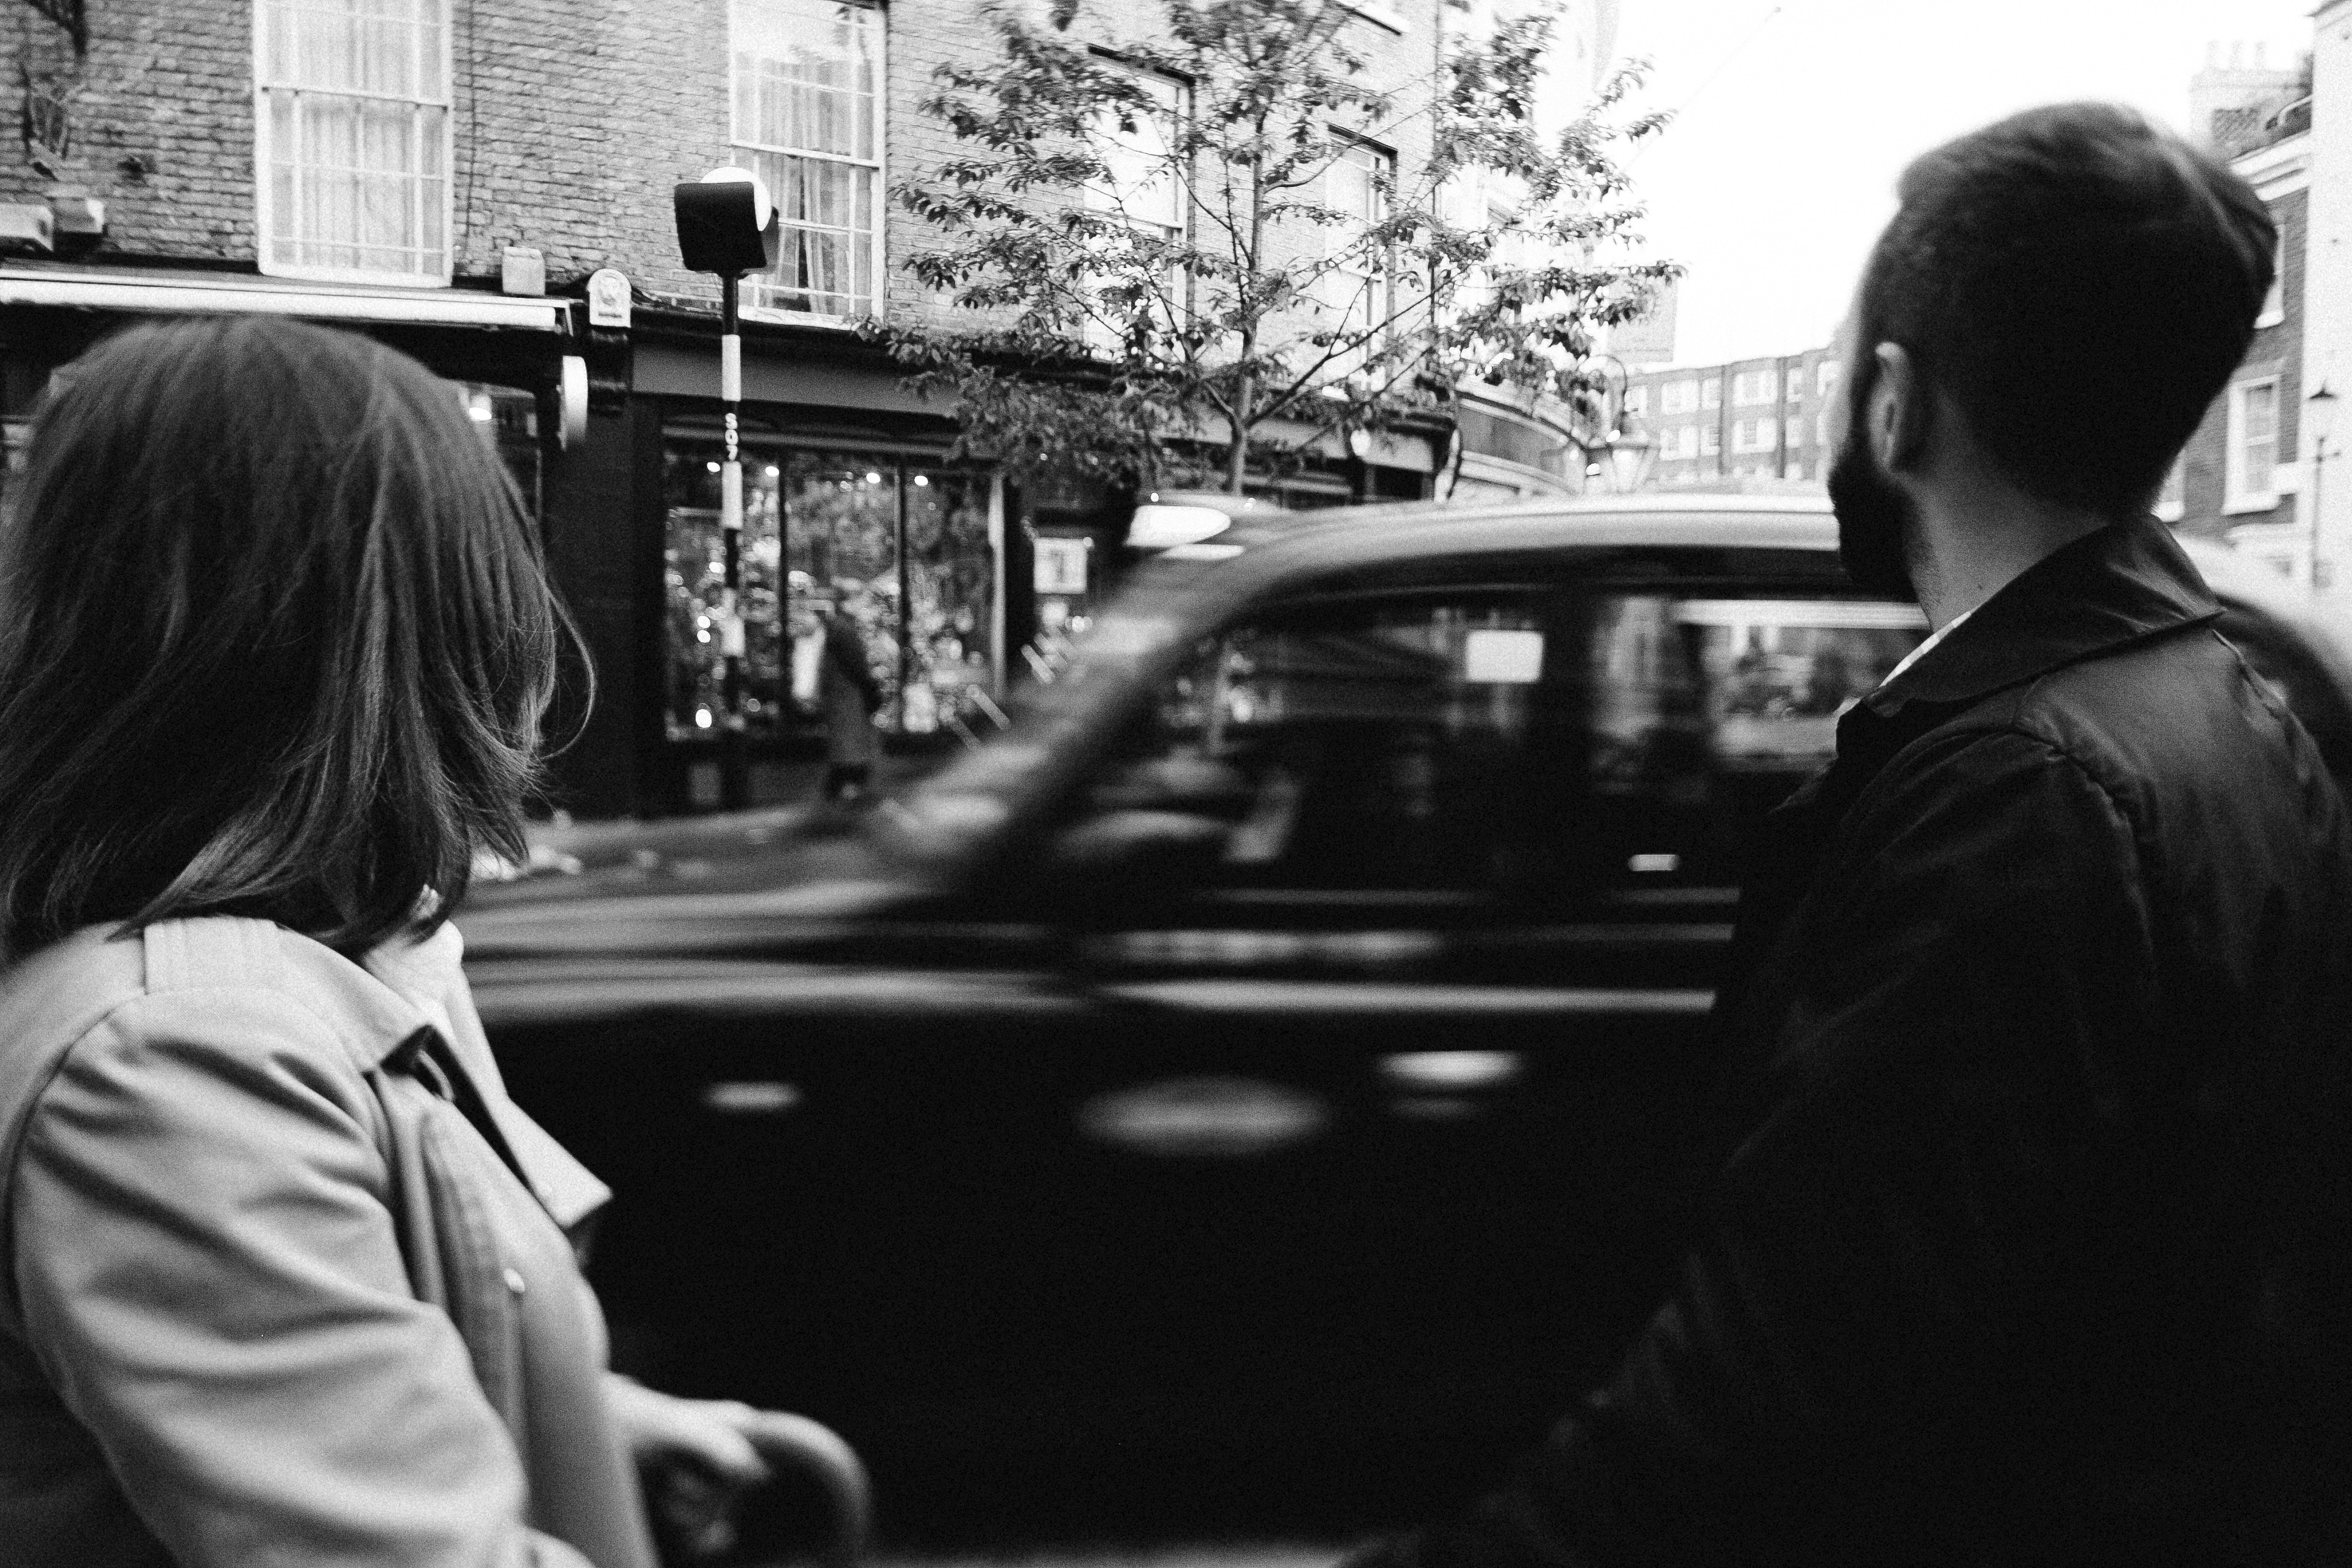 Taxi passes by man and woman on the street.